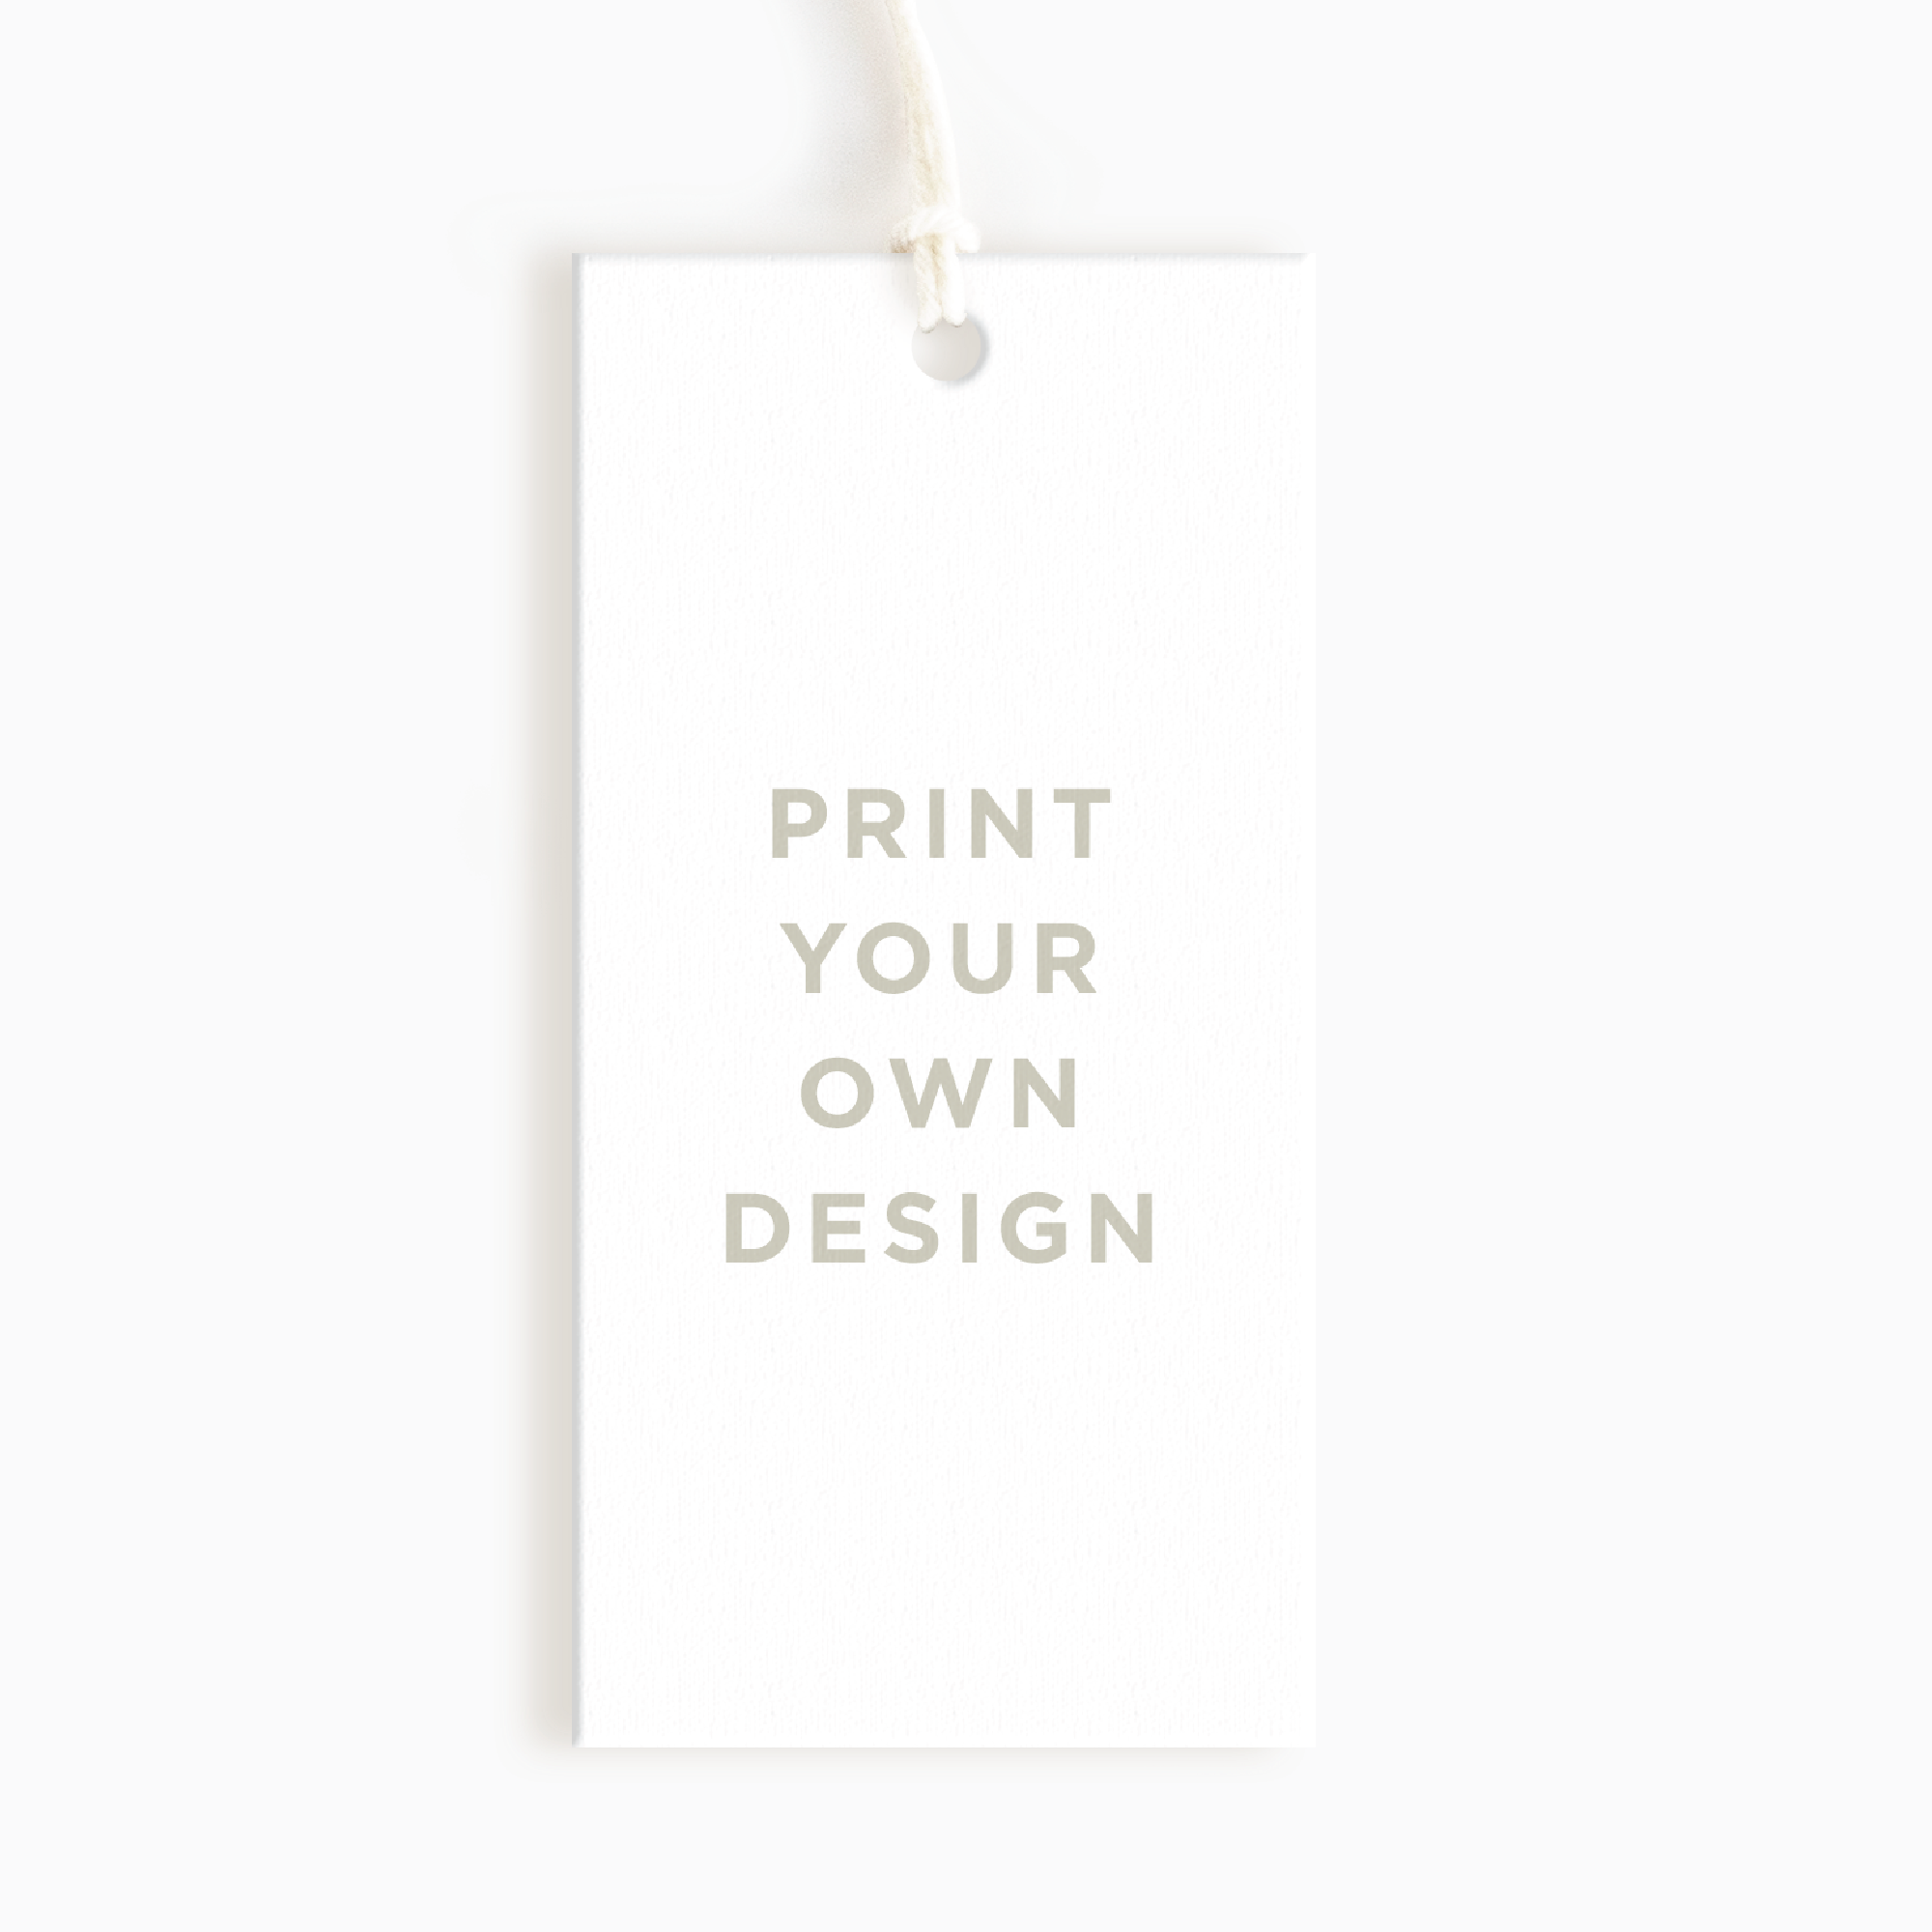 Print Your Own Rectangle Hang Tags